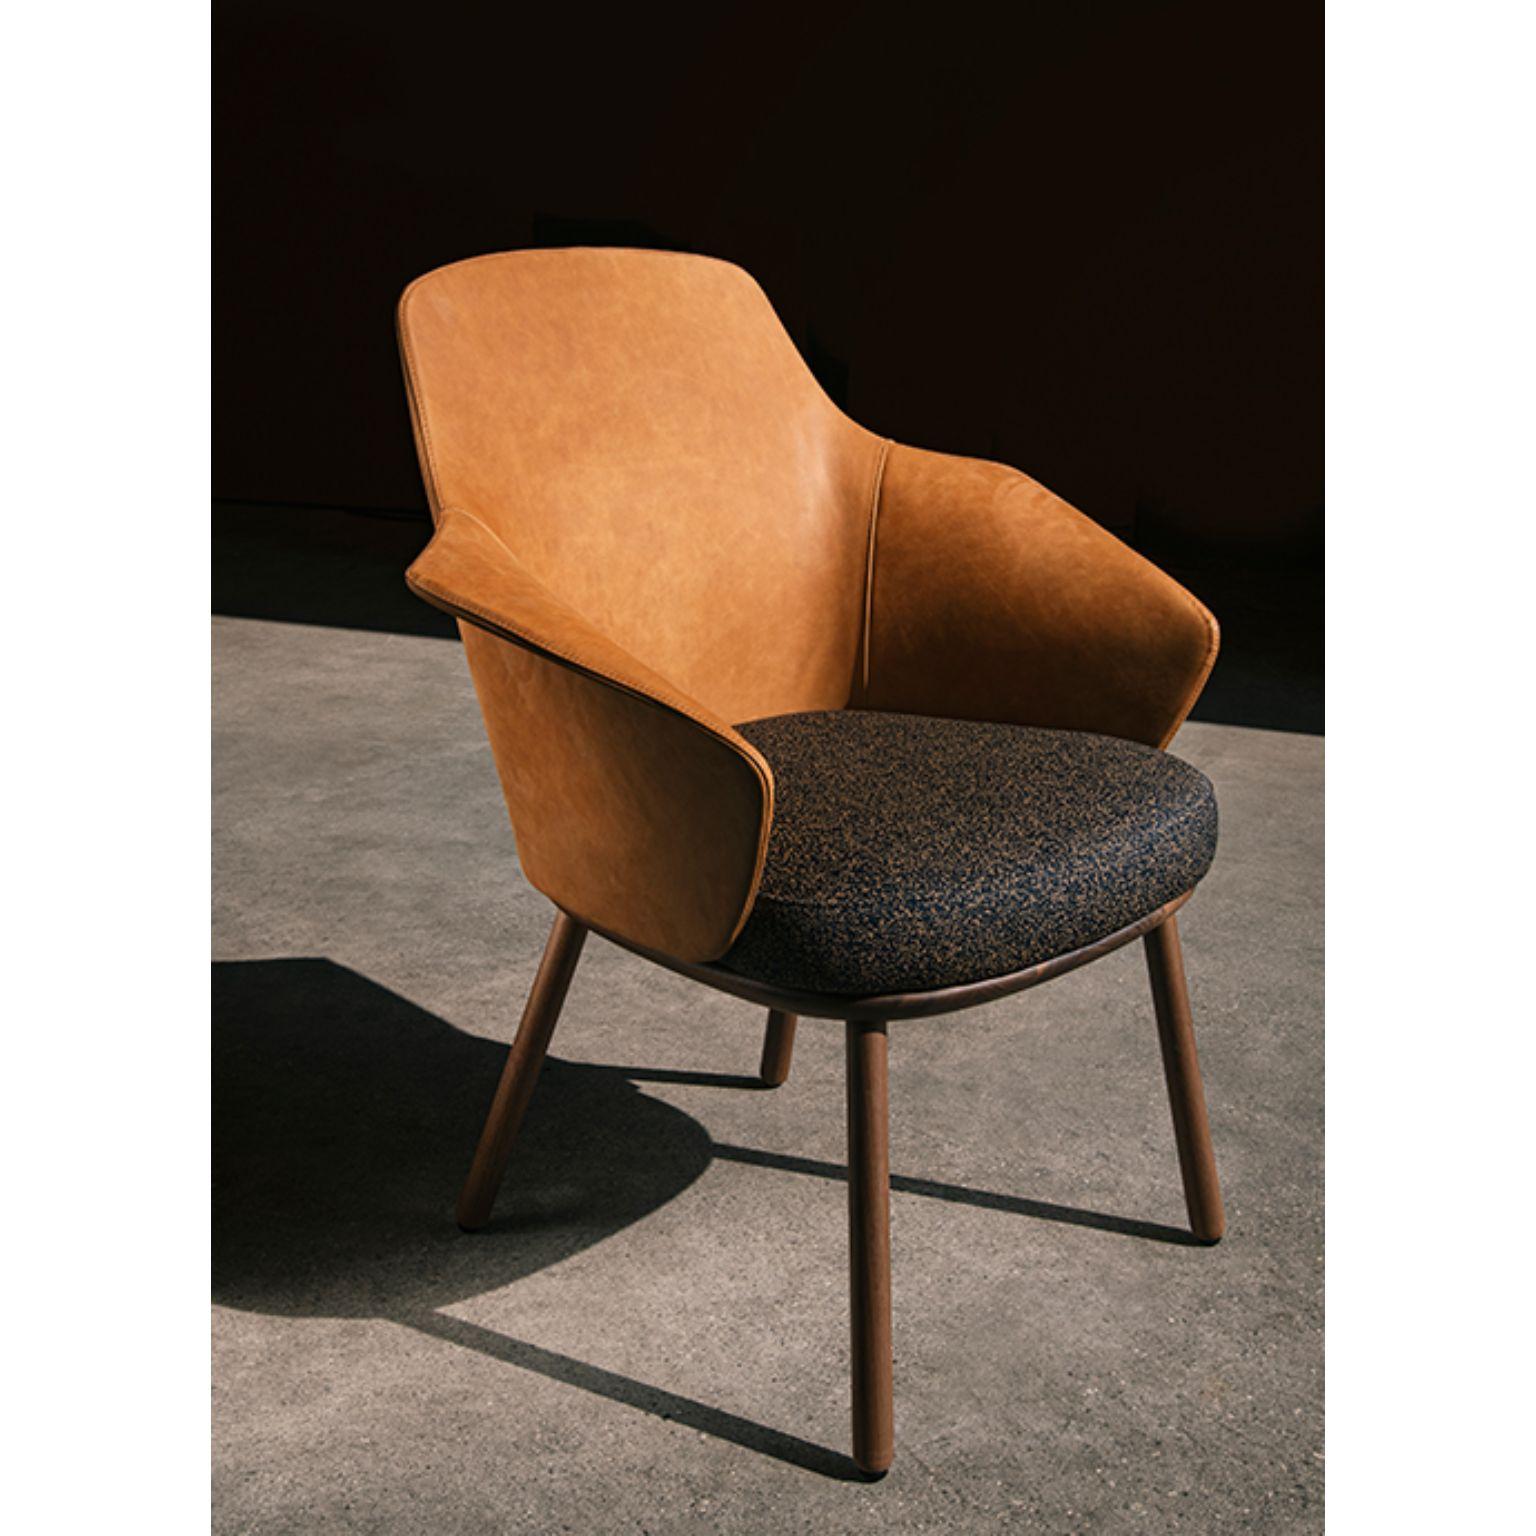 Linus armchair by Marco Dessí
Materials: Upholstery: Fabric
Structure: Wood: Noce Canaletto solid wood, coral/dark green/black stained wood
 Also available metal: Black powder-coated metal, black chrome metal

Dimensions: W71.9 x D60.2 x H86.3